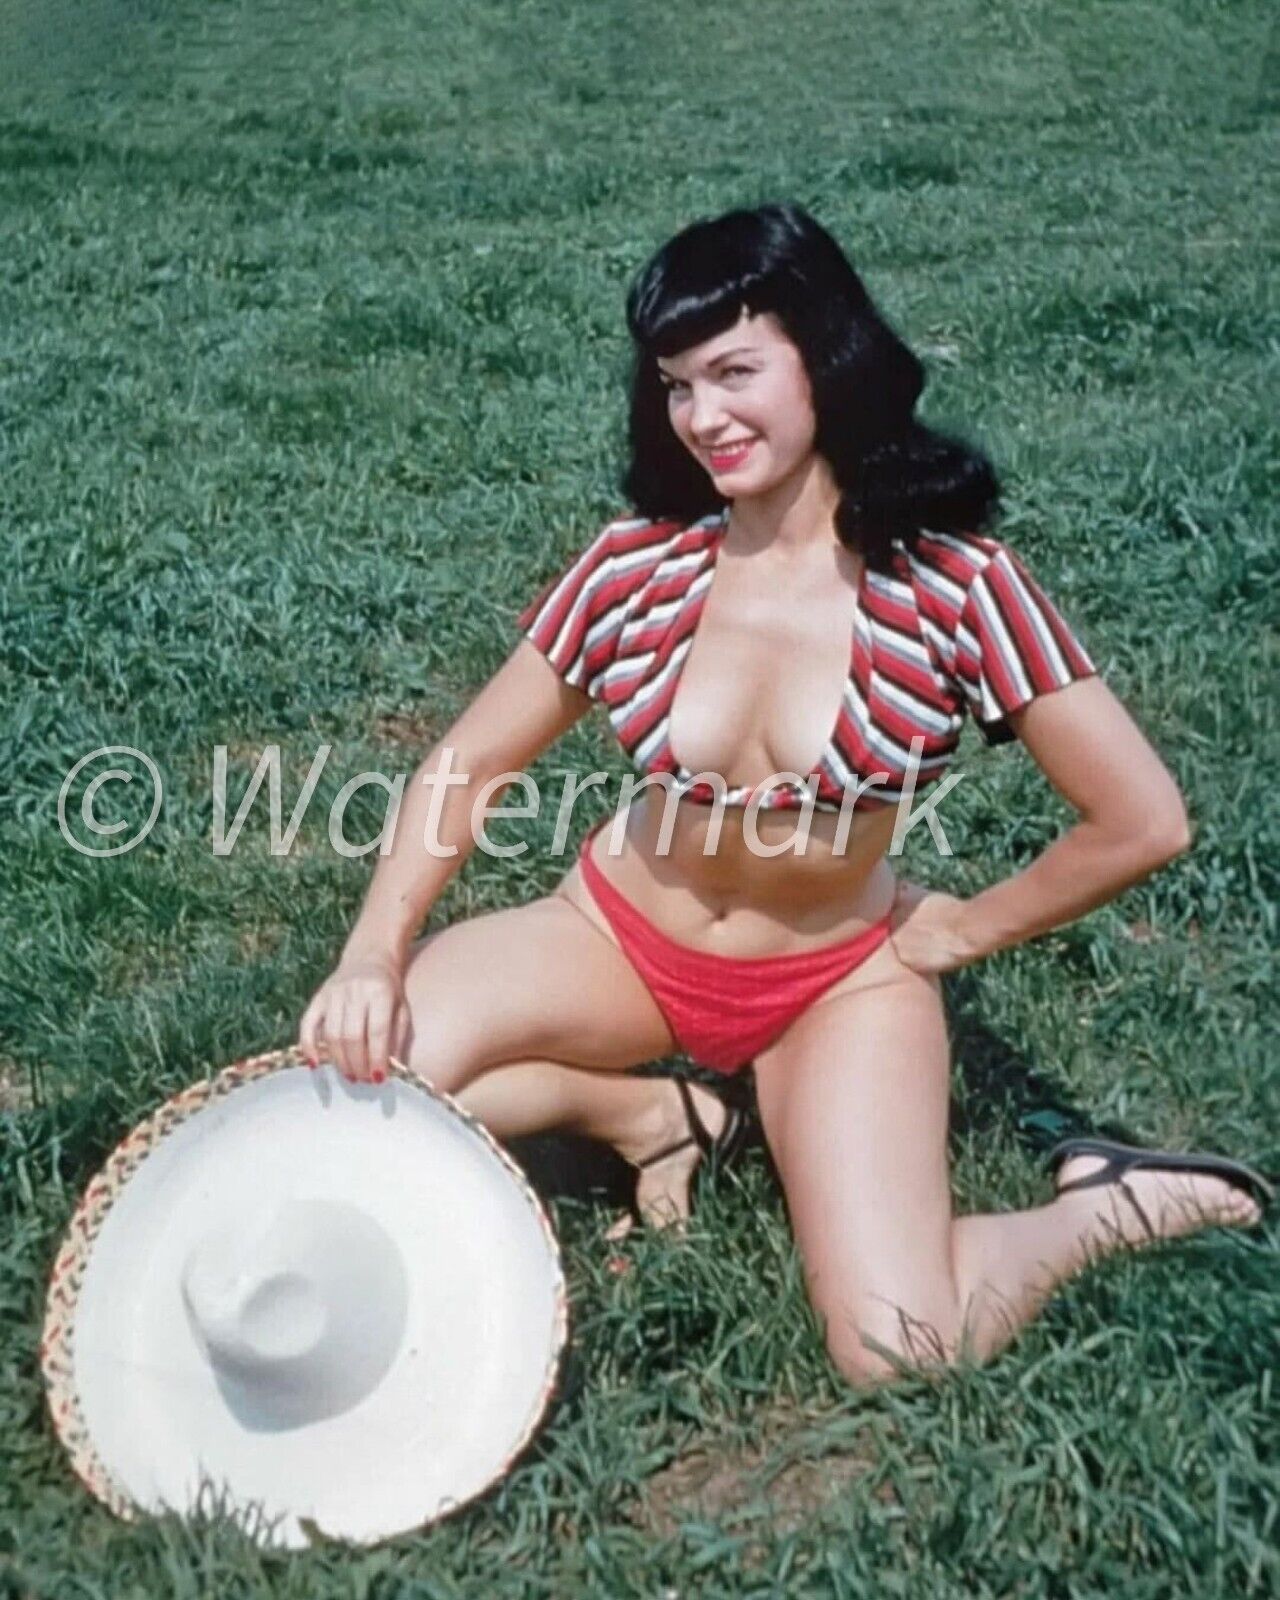 VINTAGE  1950s  PIN UP  Actress Model  BETTIE PAGE  - 8X10 PUBLICITY PHOTO